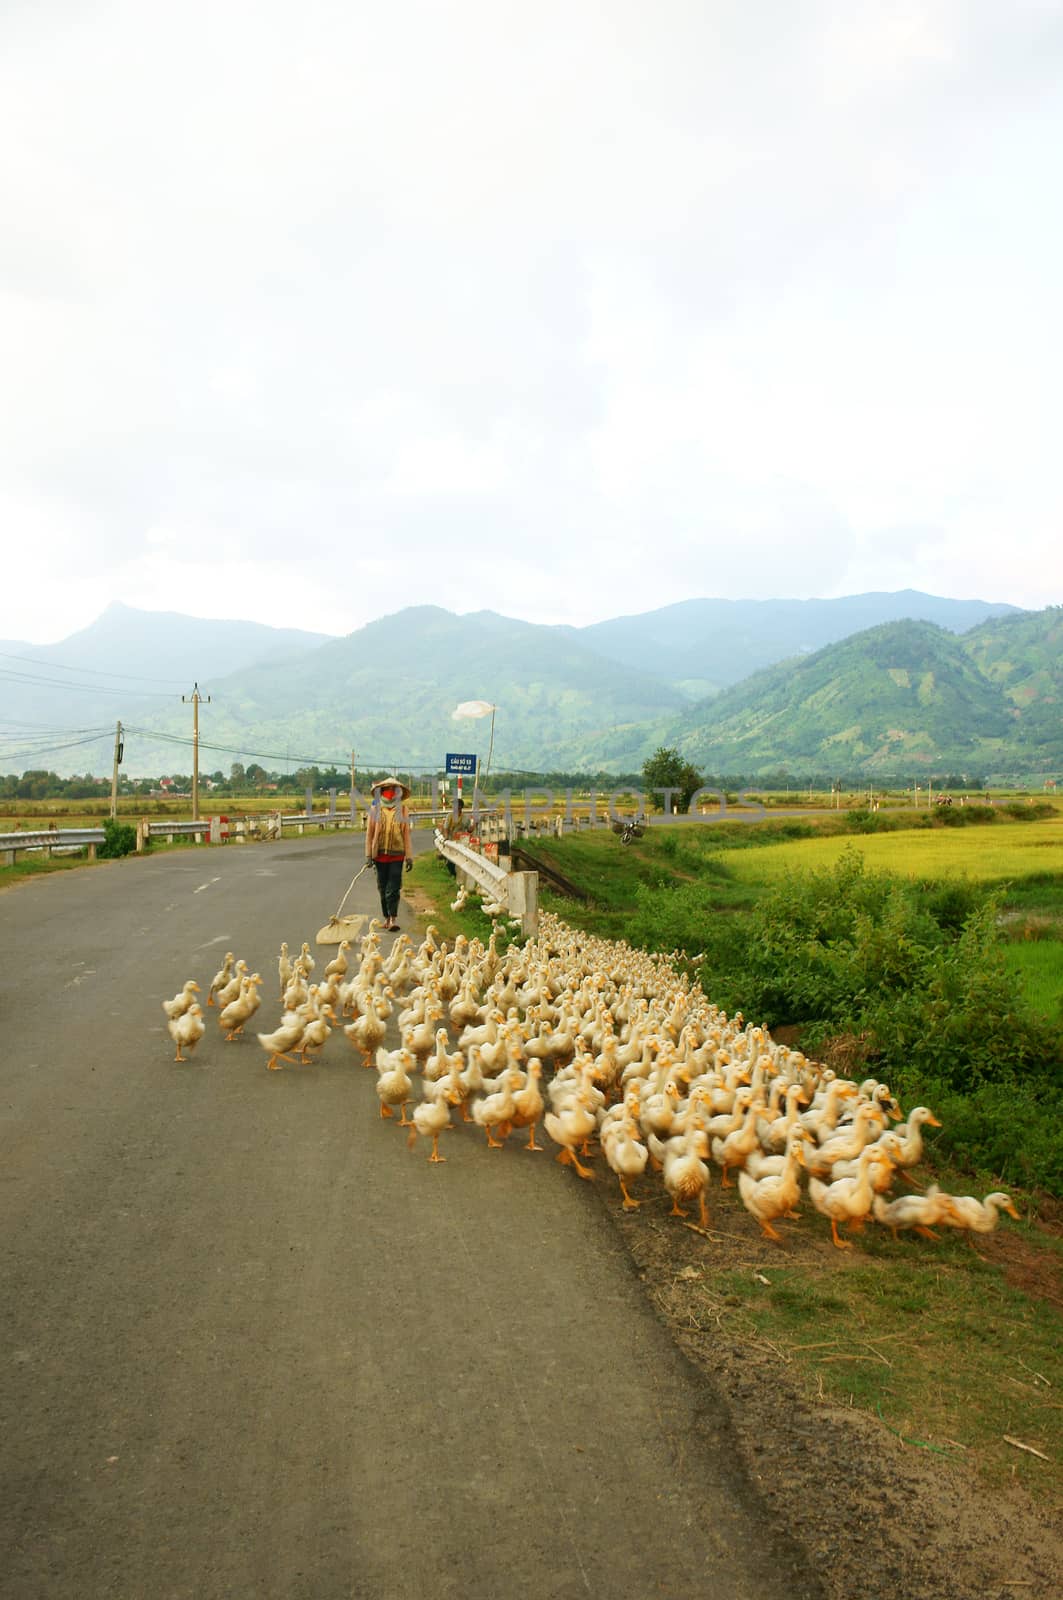 herd of duck on road by xuanhuongho